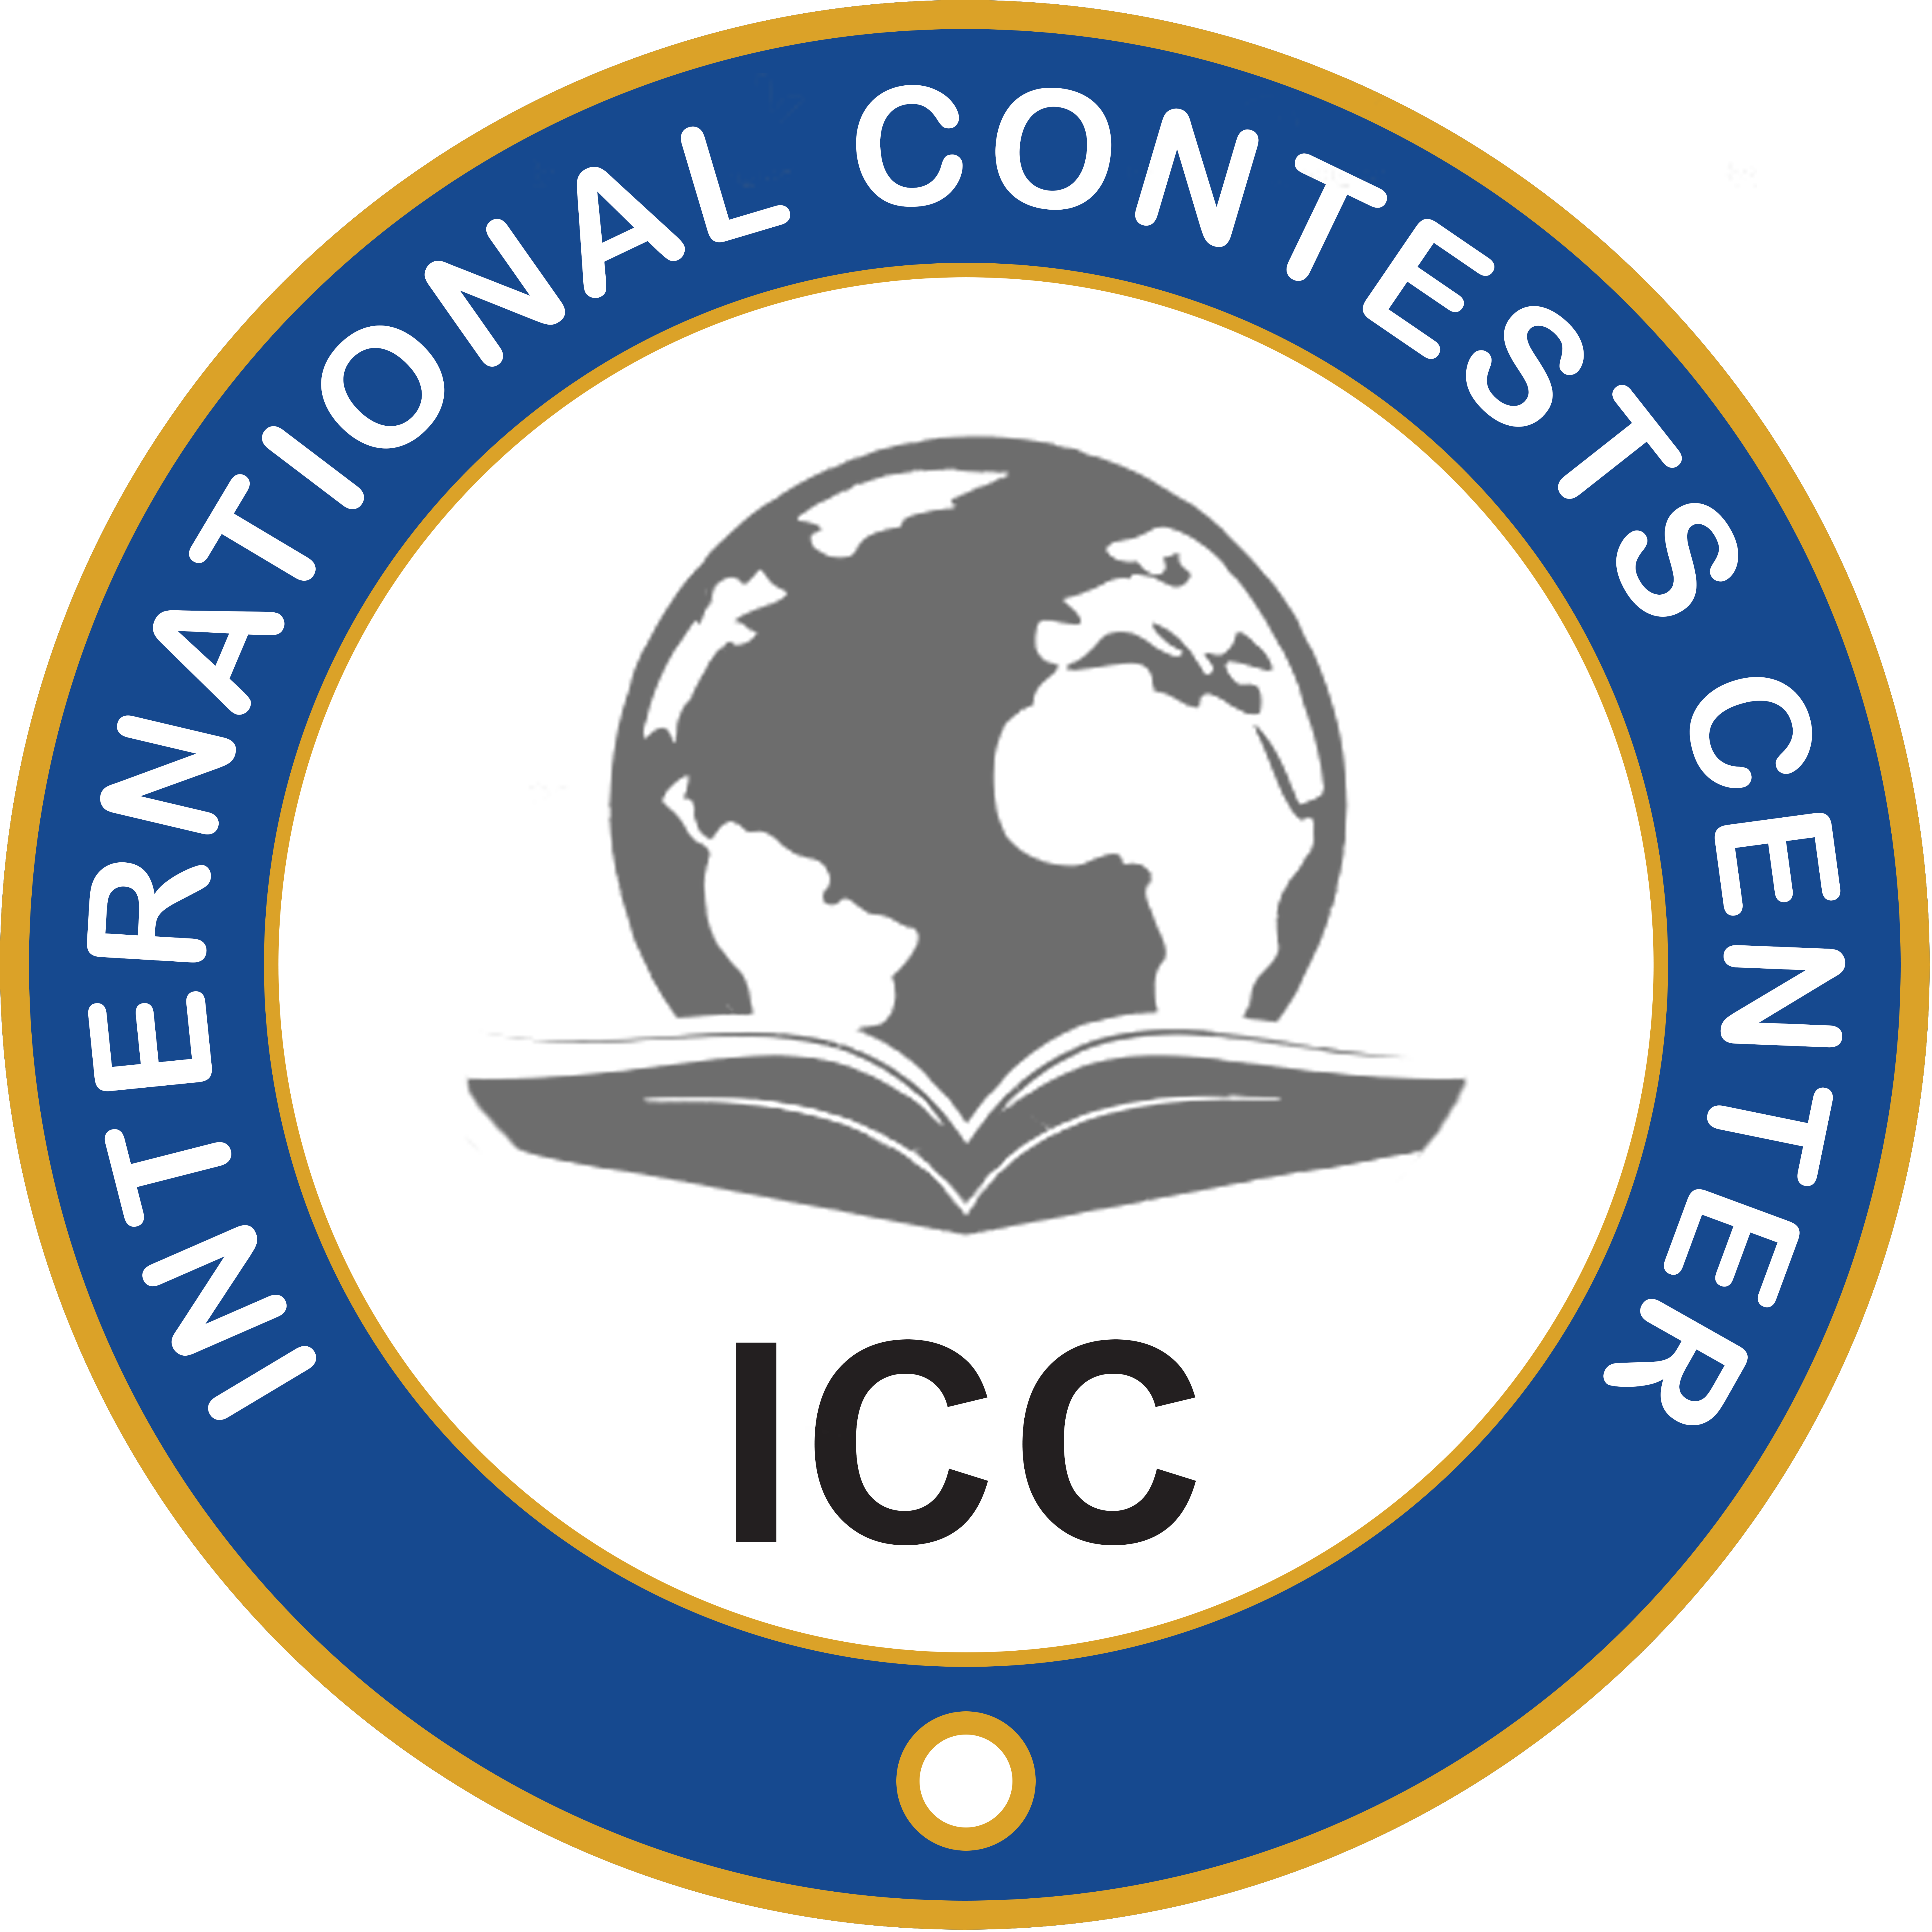 Certificates - INTERNATIONAL COUNCIL OF CERTIFICATION